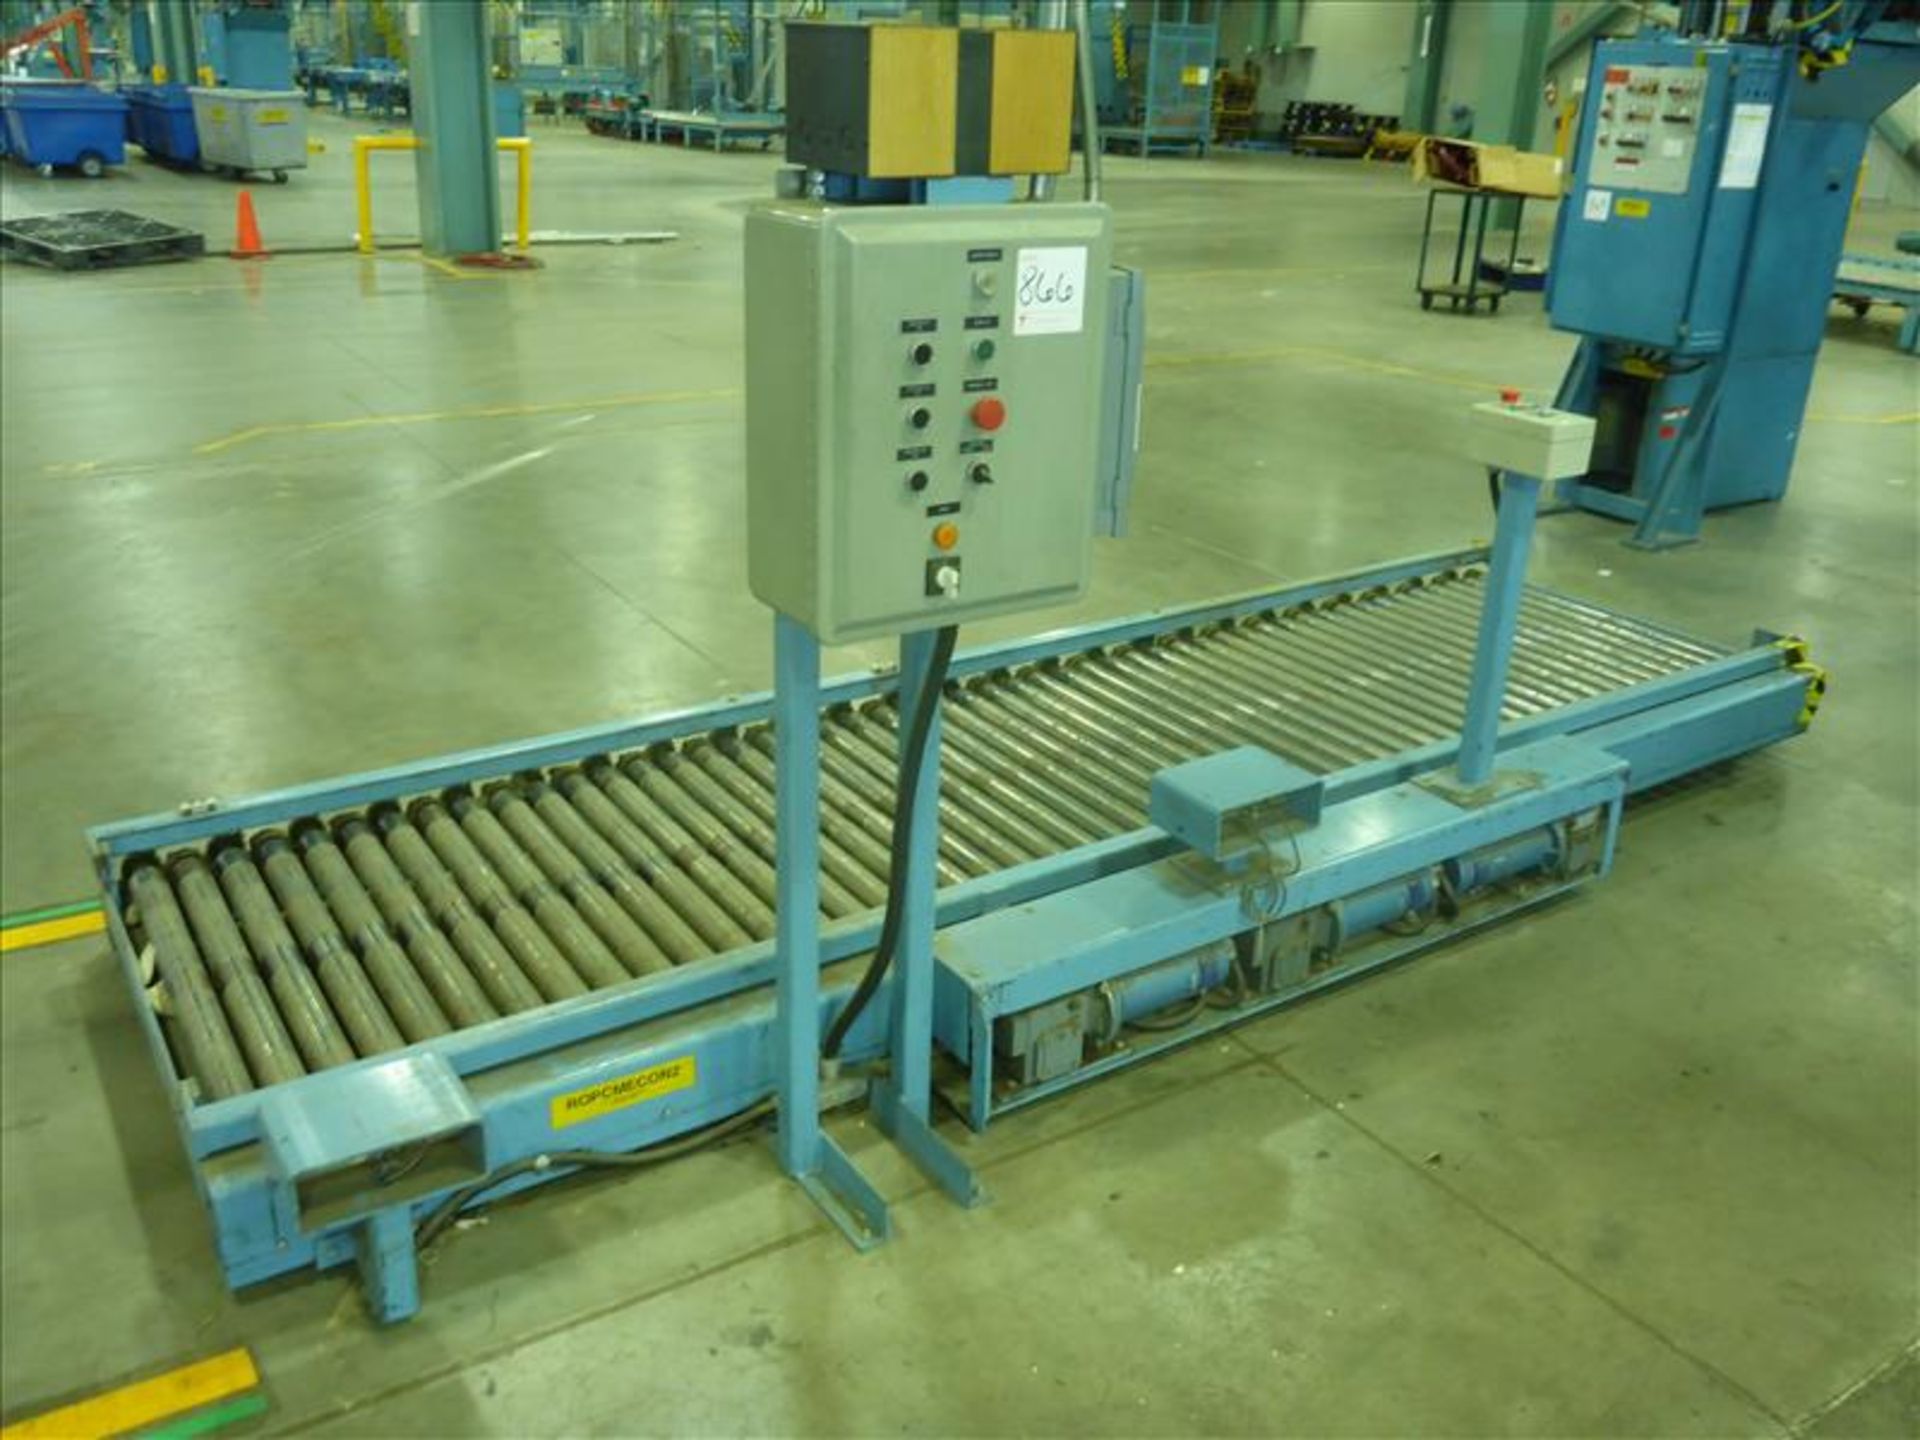 Orion power roller conveyor, mod. CY44, approx. 38 in. x 153 in. c/w control panel